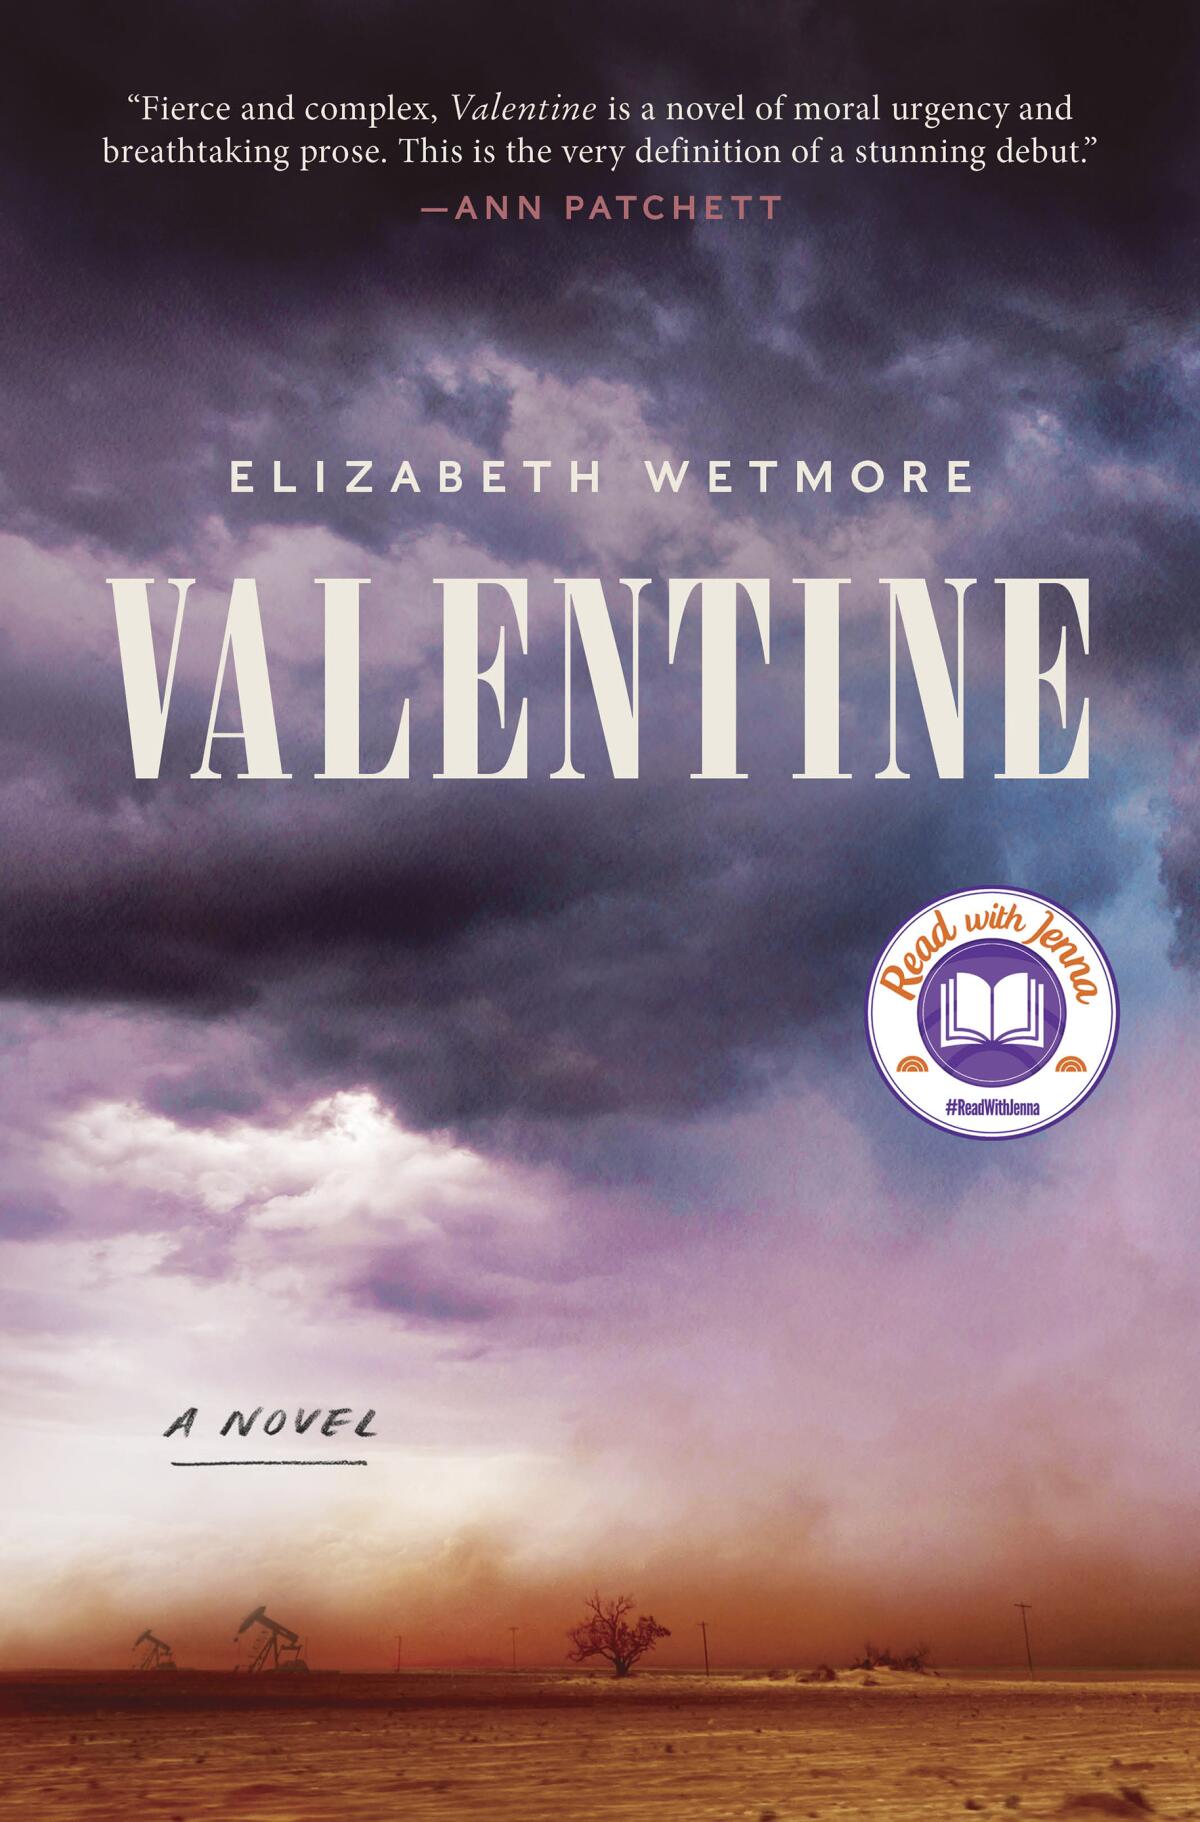 Book Review - Valentine